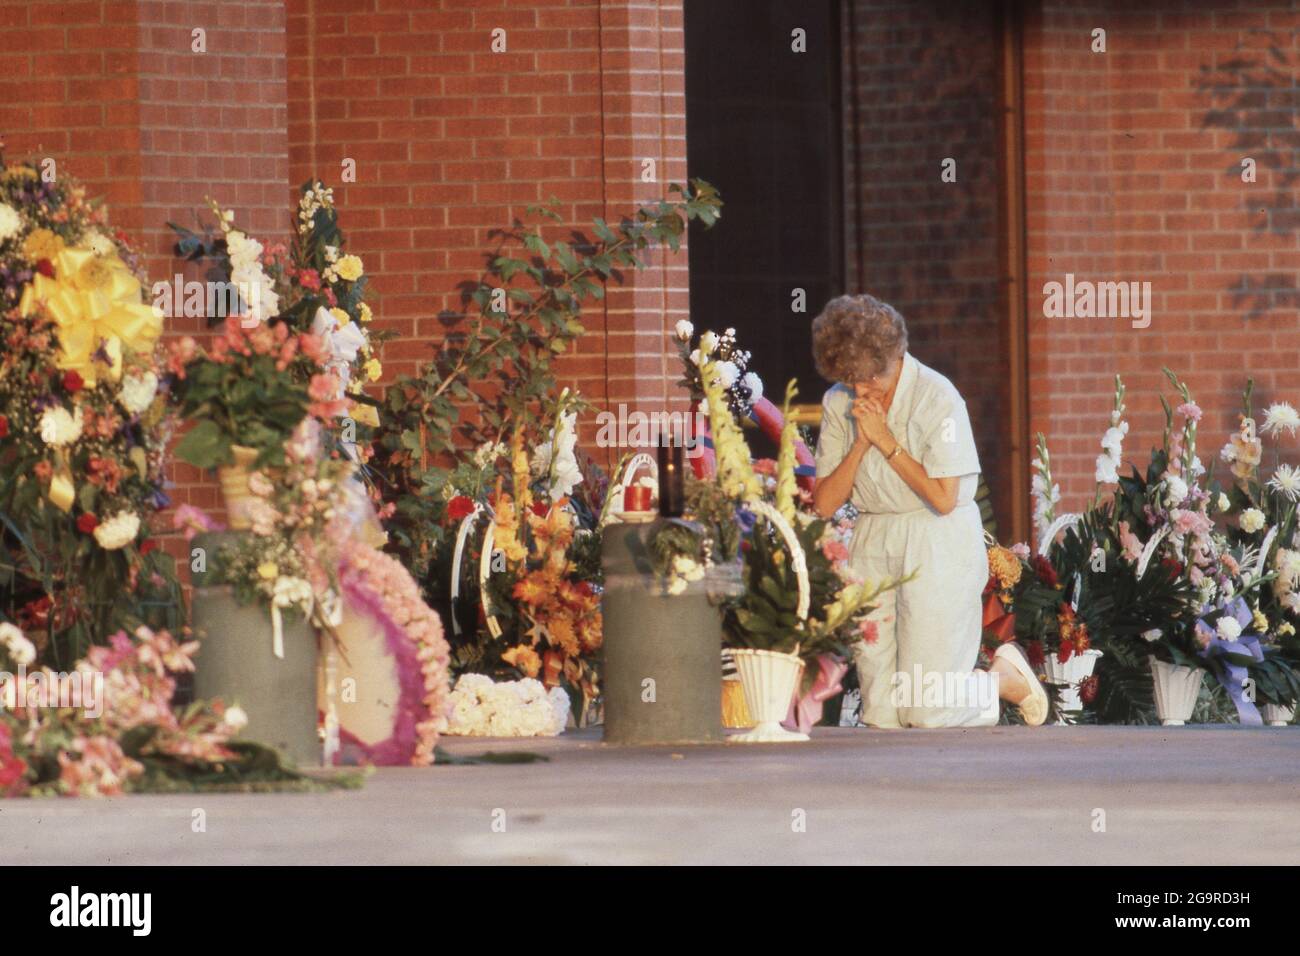 Killeen Texas USA, October 1991: Woman kneels in prayers among flowers left in memory of the victims of a mass shooting at Luby's Cafeteria in Killeen. on October 16. George Hennard, a 35-year-old Killeen resident, crashed a pickup into the eatery and shot 23 lunch-time diners and staff to death before killing himself. ©Bob Daemmrich Stock Photo